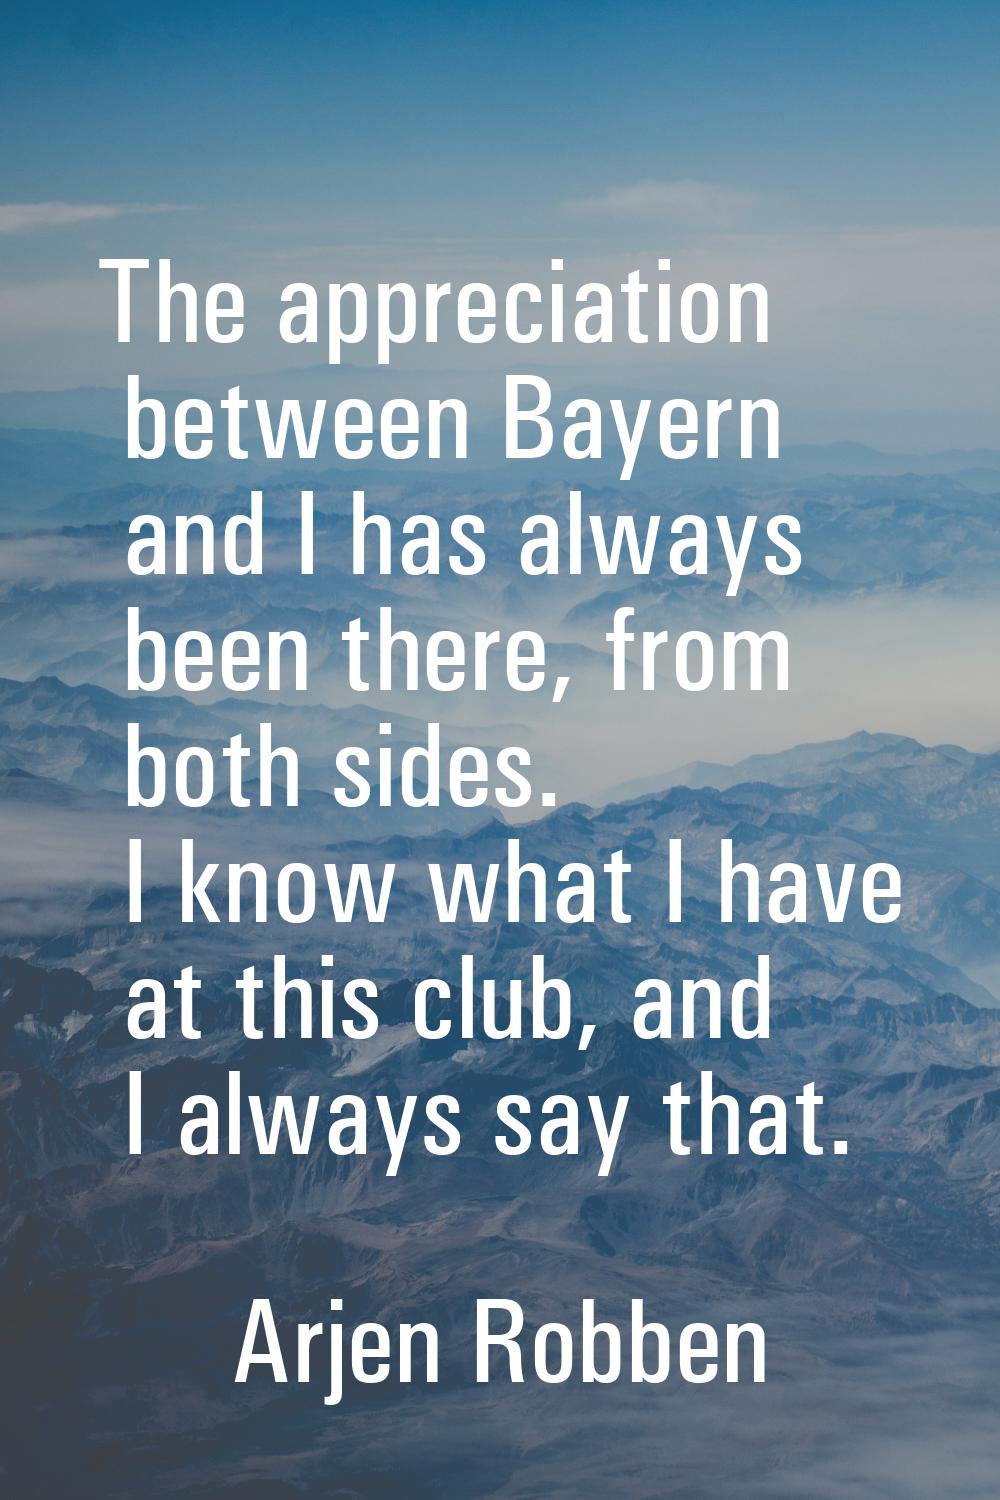 The appreciation between Bayern and I has always been there, from both sides. I know what I have at